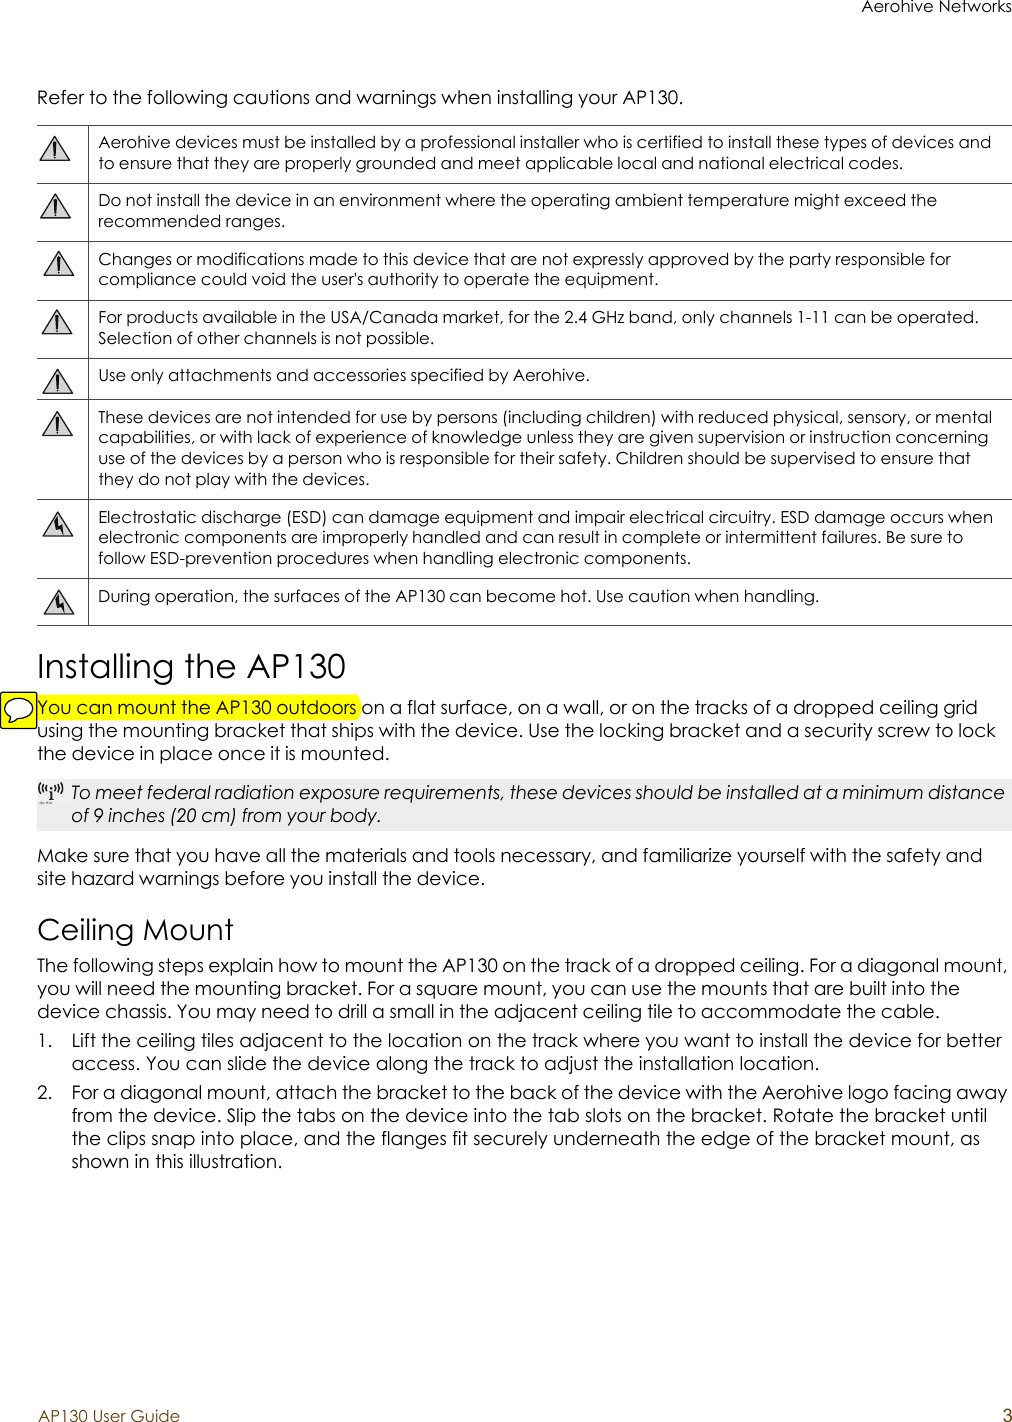 Aerohive NetworksAP130 User Guide 3Refer to the following cautions and warnings when installing your AP130.Installing the AP130You can mount the AP130 outdoors on a flat surface, on a wall, or on the tracks of a dropped ceiling grid using the mounting bracket that ships with the device. Use the locking bracket and a security screw to lock the device in place once it is mounted.Make sure that you have all the materials and tools necessary, and familiarize yourself with the safety and site hazard warnings before you install the device. Ceiling MountThe following steps explain how to mount the AP130 on the track of a dropped ceiling. For a diagonal mount, you will need the mounting bracket. For a square mount, you can use the mounts that are built into the device chassis. You may need to drill a small in the adjacent ceiling tile to accommodate the cable.1. Lift the ceiling tiles adjacent to the location on the track where you want to install the device for better access. You can slide the device along the track to adjust the installation location.2. For a diagonal mount, attach the bracket to the back of the device with the Aerohive logo facing away from the device. Slip the tabs on the device into the tab slots on the bracket. Rotate the bracket until the clips snap into place, and the flanges fit securely underneath the edge of the bracket mount, as shown in this illustration.Aerohive devices must be installed by a professional installer who is certified to install these types of devices and to ensure that they are properly grounded and meet applicable local and national electrical codes. Do not install the device in an environment where the operating ambient temperature might exceed the recommended ranges.Changes or modifications made to this device that are not expressly approved by the party responsible for compliance could void the user&apos;s authority to operate the equipment.For products available in the USA/Canada market, for the 2.4 GHz band, only channels 1-11 can be operated. Selection of other channels is not possible.Use only attachments and accessories specified by Aerohive.These devices are not intended for use by persons (including children) with reduced physical, sensory, or mental capabilities, or with lack of experience of knowledge unless they are given supervision or instruction concerning use of the devices by a person who is responsible for their safety. Children should be supervised to ensure that they do not play with the devices.Electrostatic discharge (ESD) can damage equipment and impair electrical circuitry. ESD damage occurs when electronic components are improperly handled and can result in complete or intermittent failures. Be sure to follow ESD-prevention procedures when handling electronic components.During operation, the surfaces of the AP130 can become hot. Use caution when handling.ou muTo meet federal radiation exposure requirements, these devices should be installed at a minimum distance of 9 inches (20 cm) from your body.